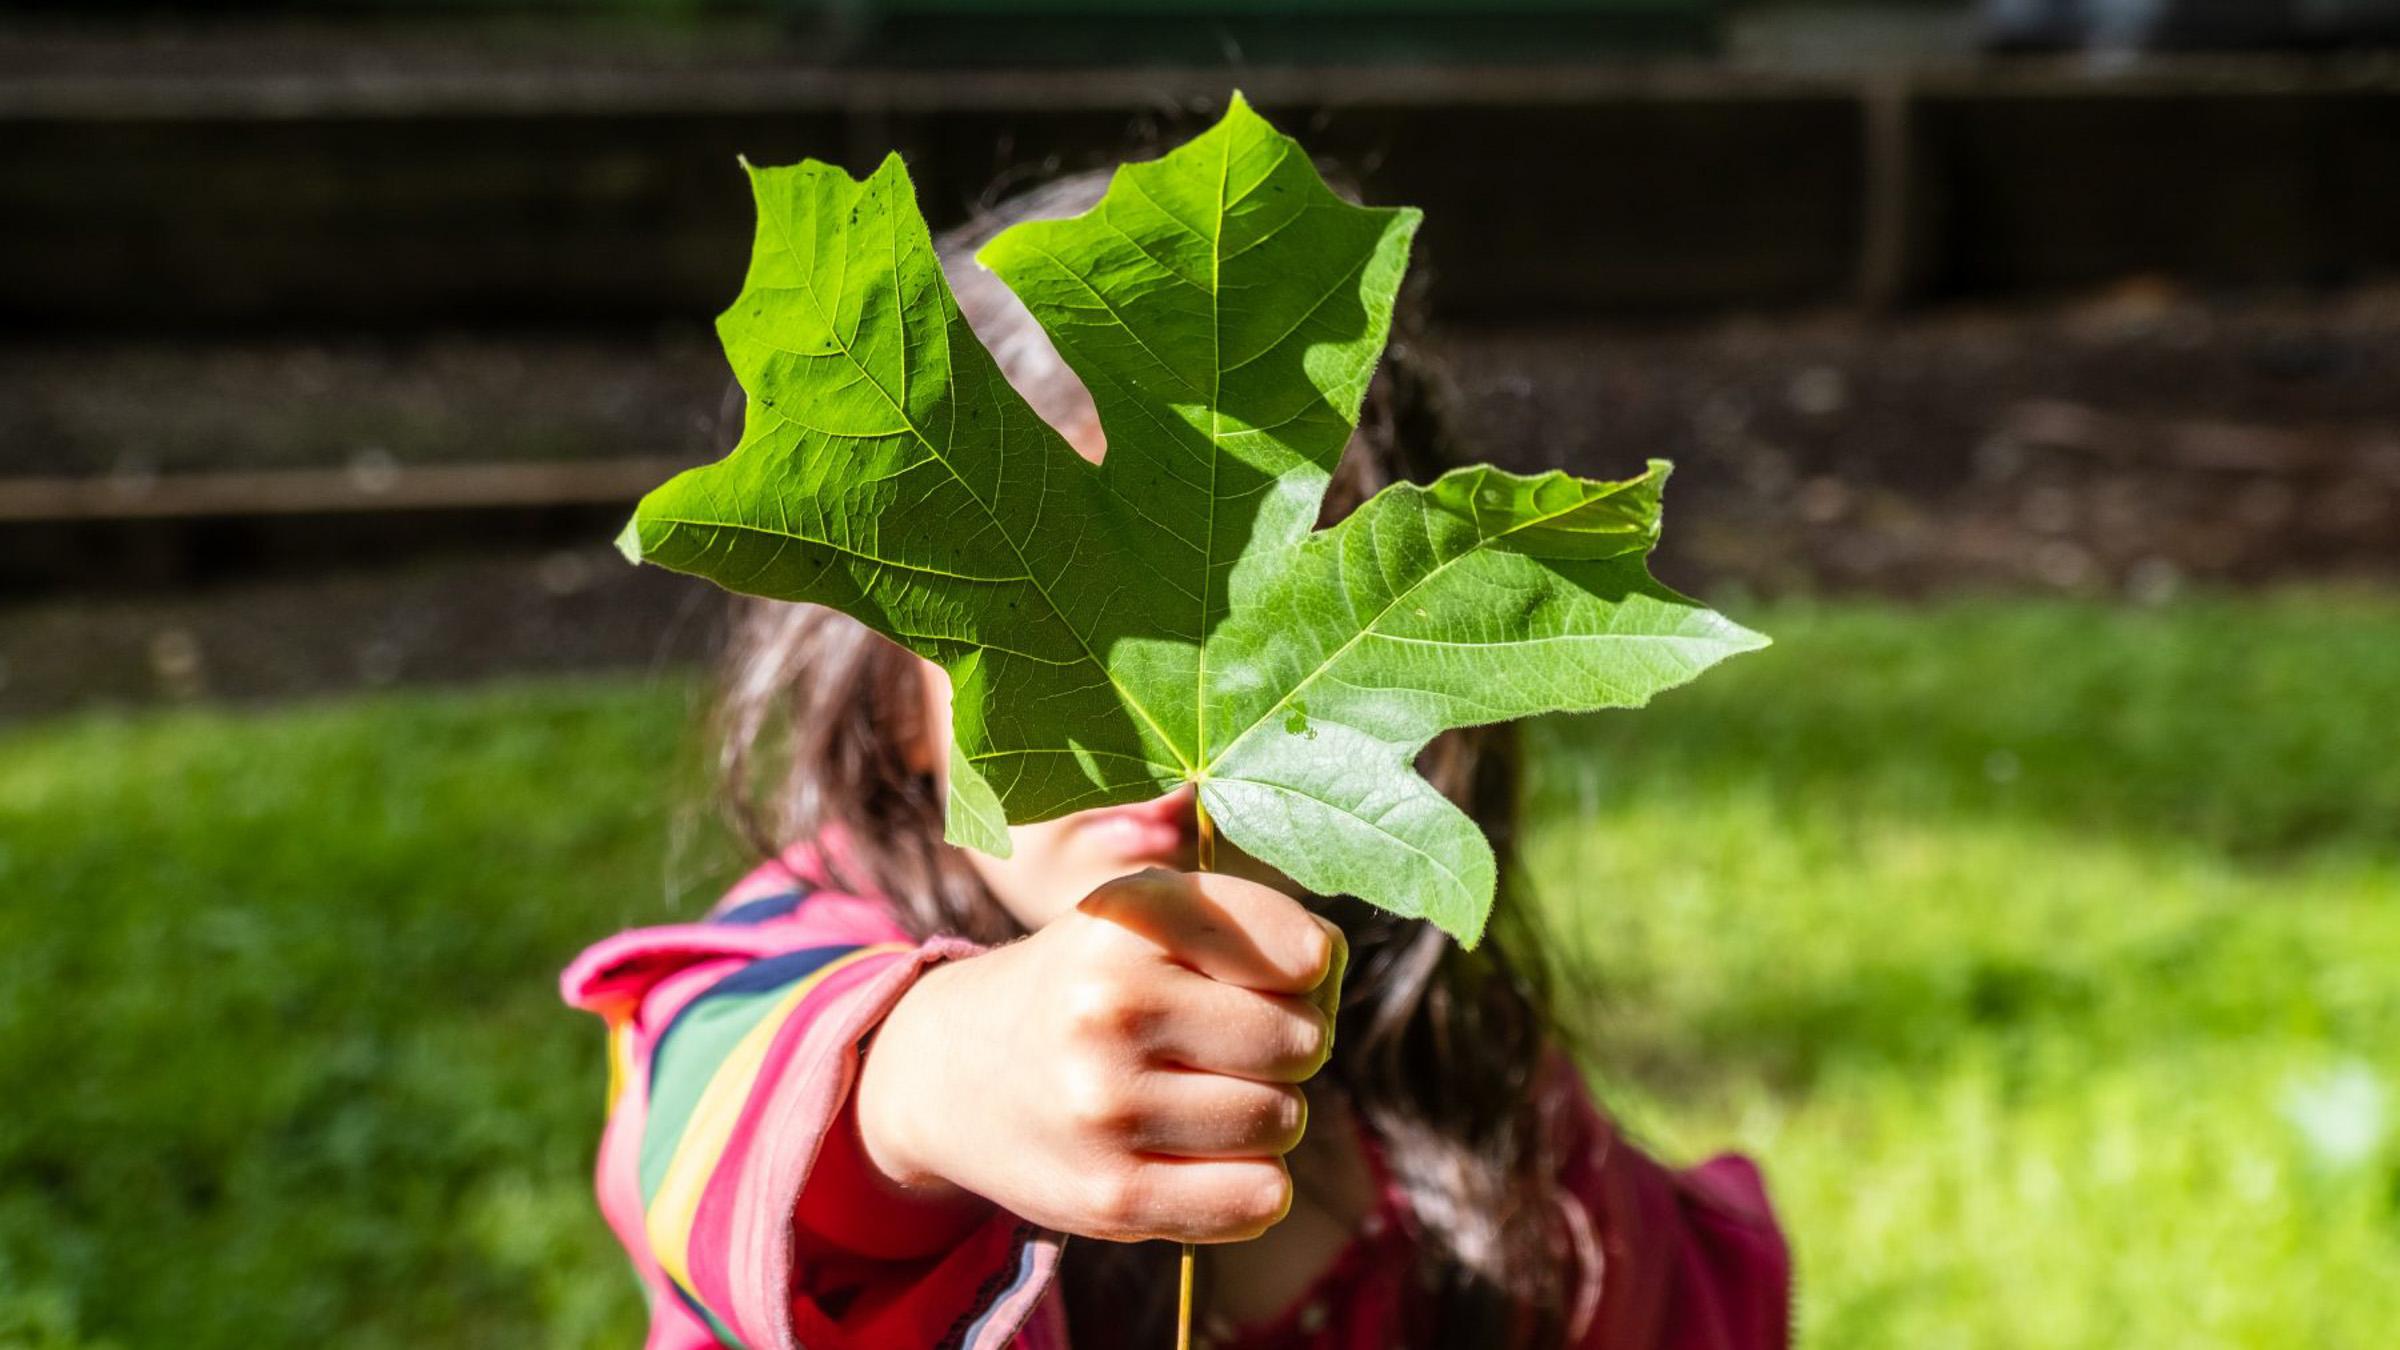 Young child holding a large leaf in front of their face